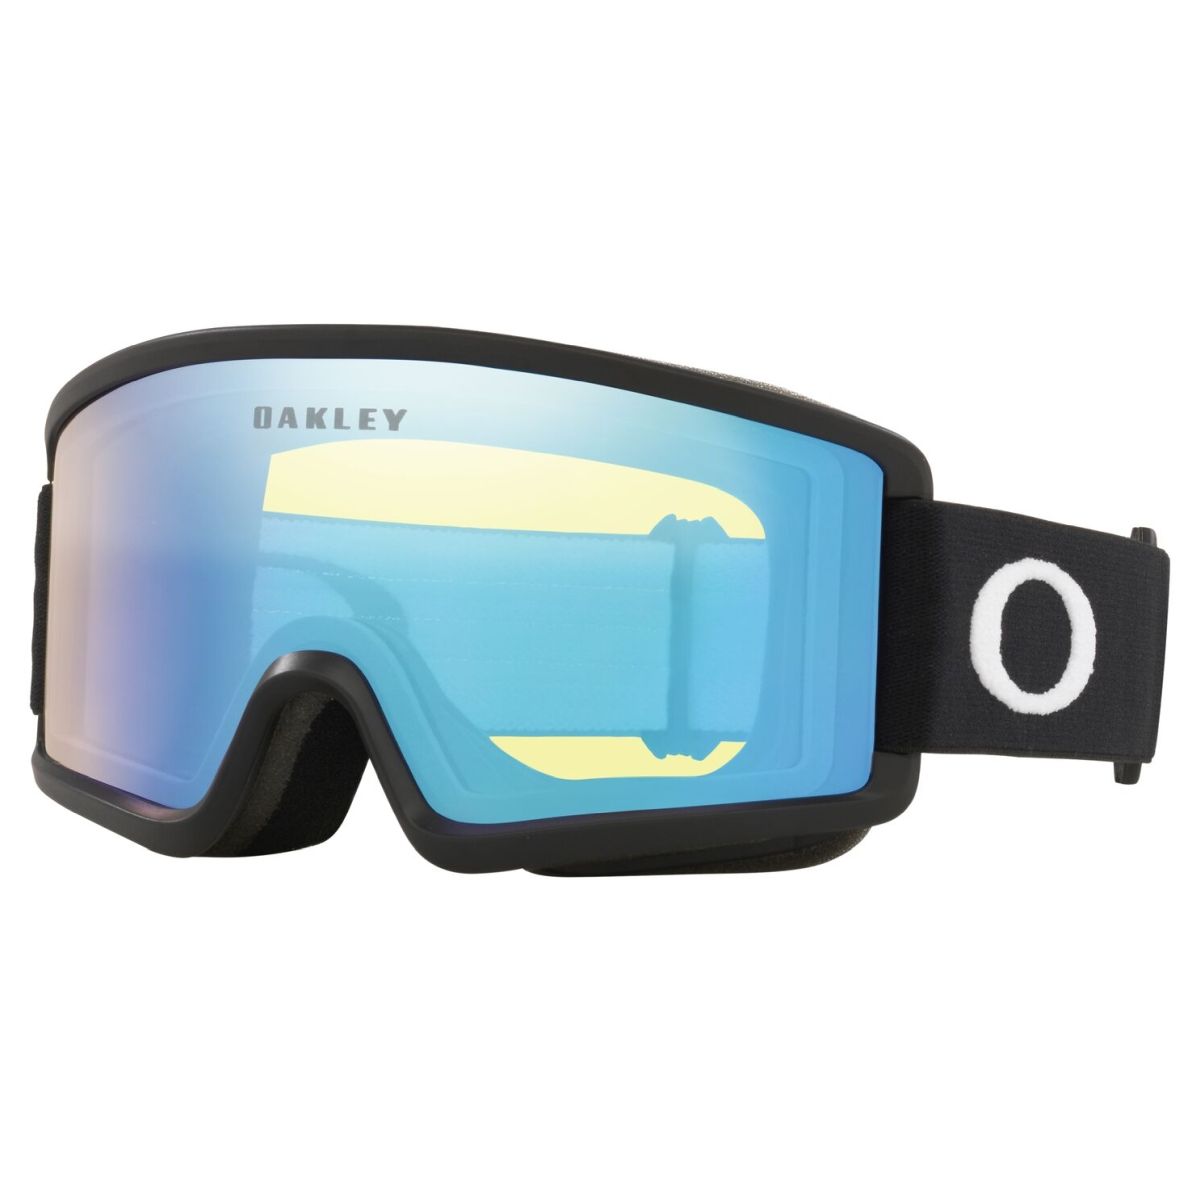 OAKLEY TARGET LINE S SNOW GOGGLES 7122/04/00